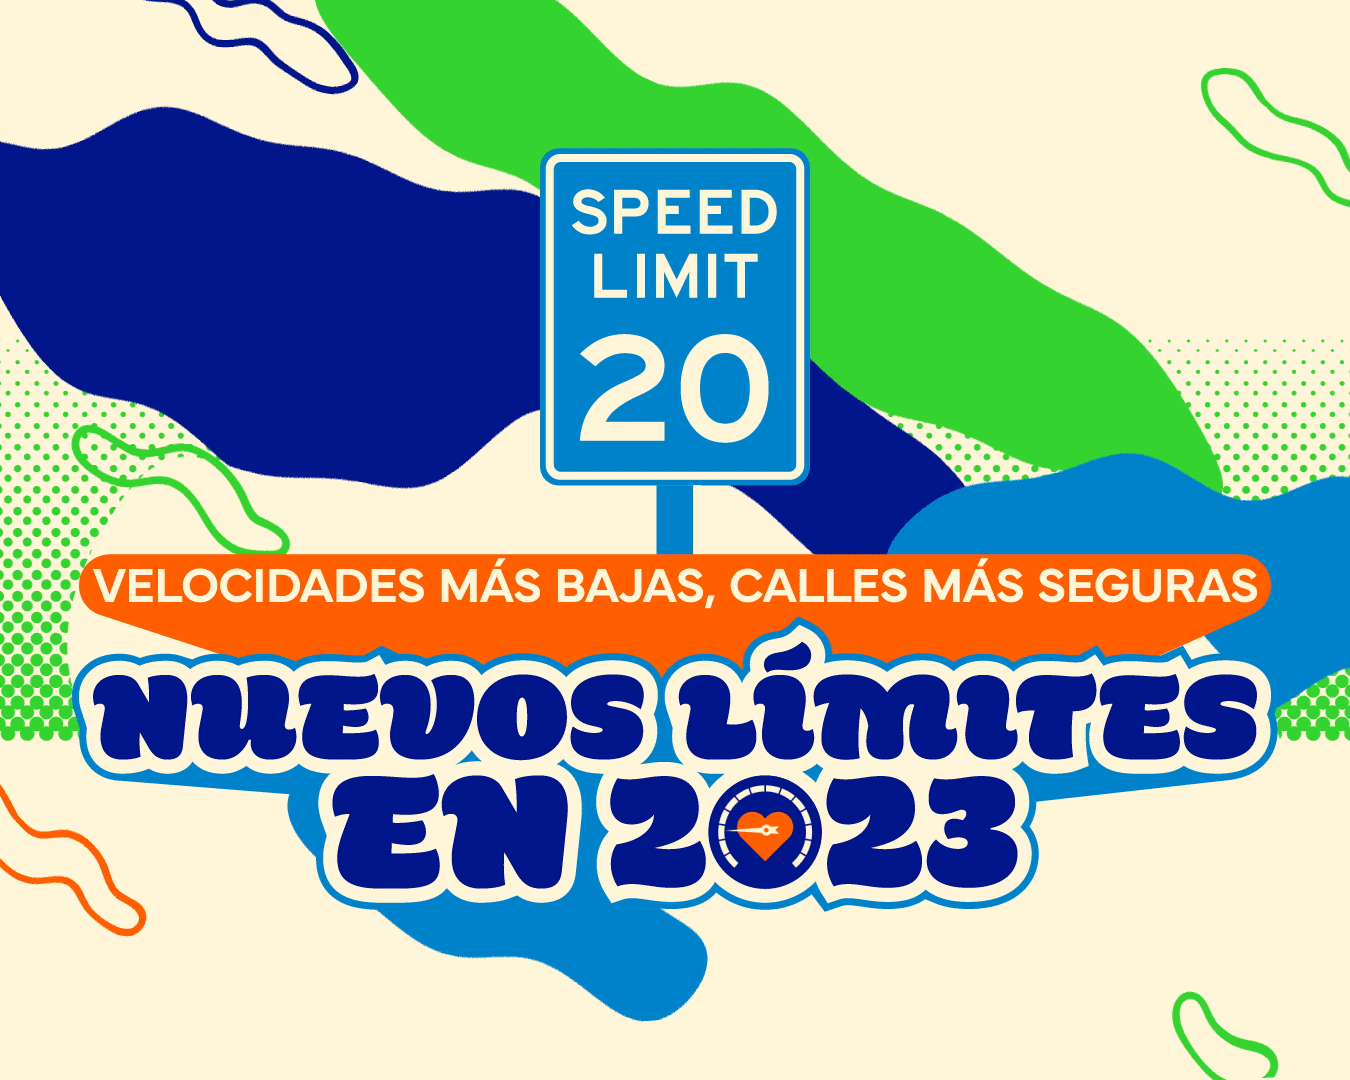 City of Tacoma speed reduction campaign animated GIF in Spanish